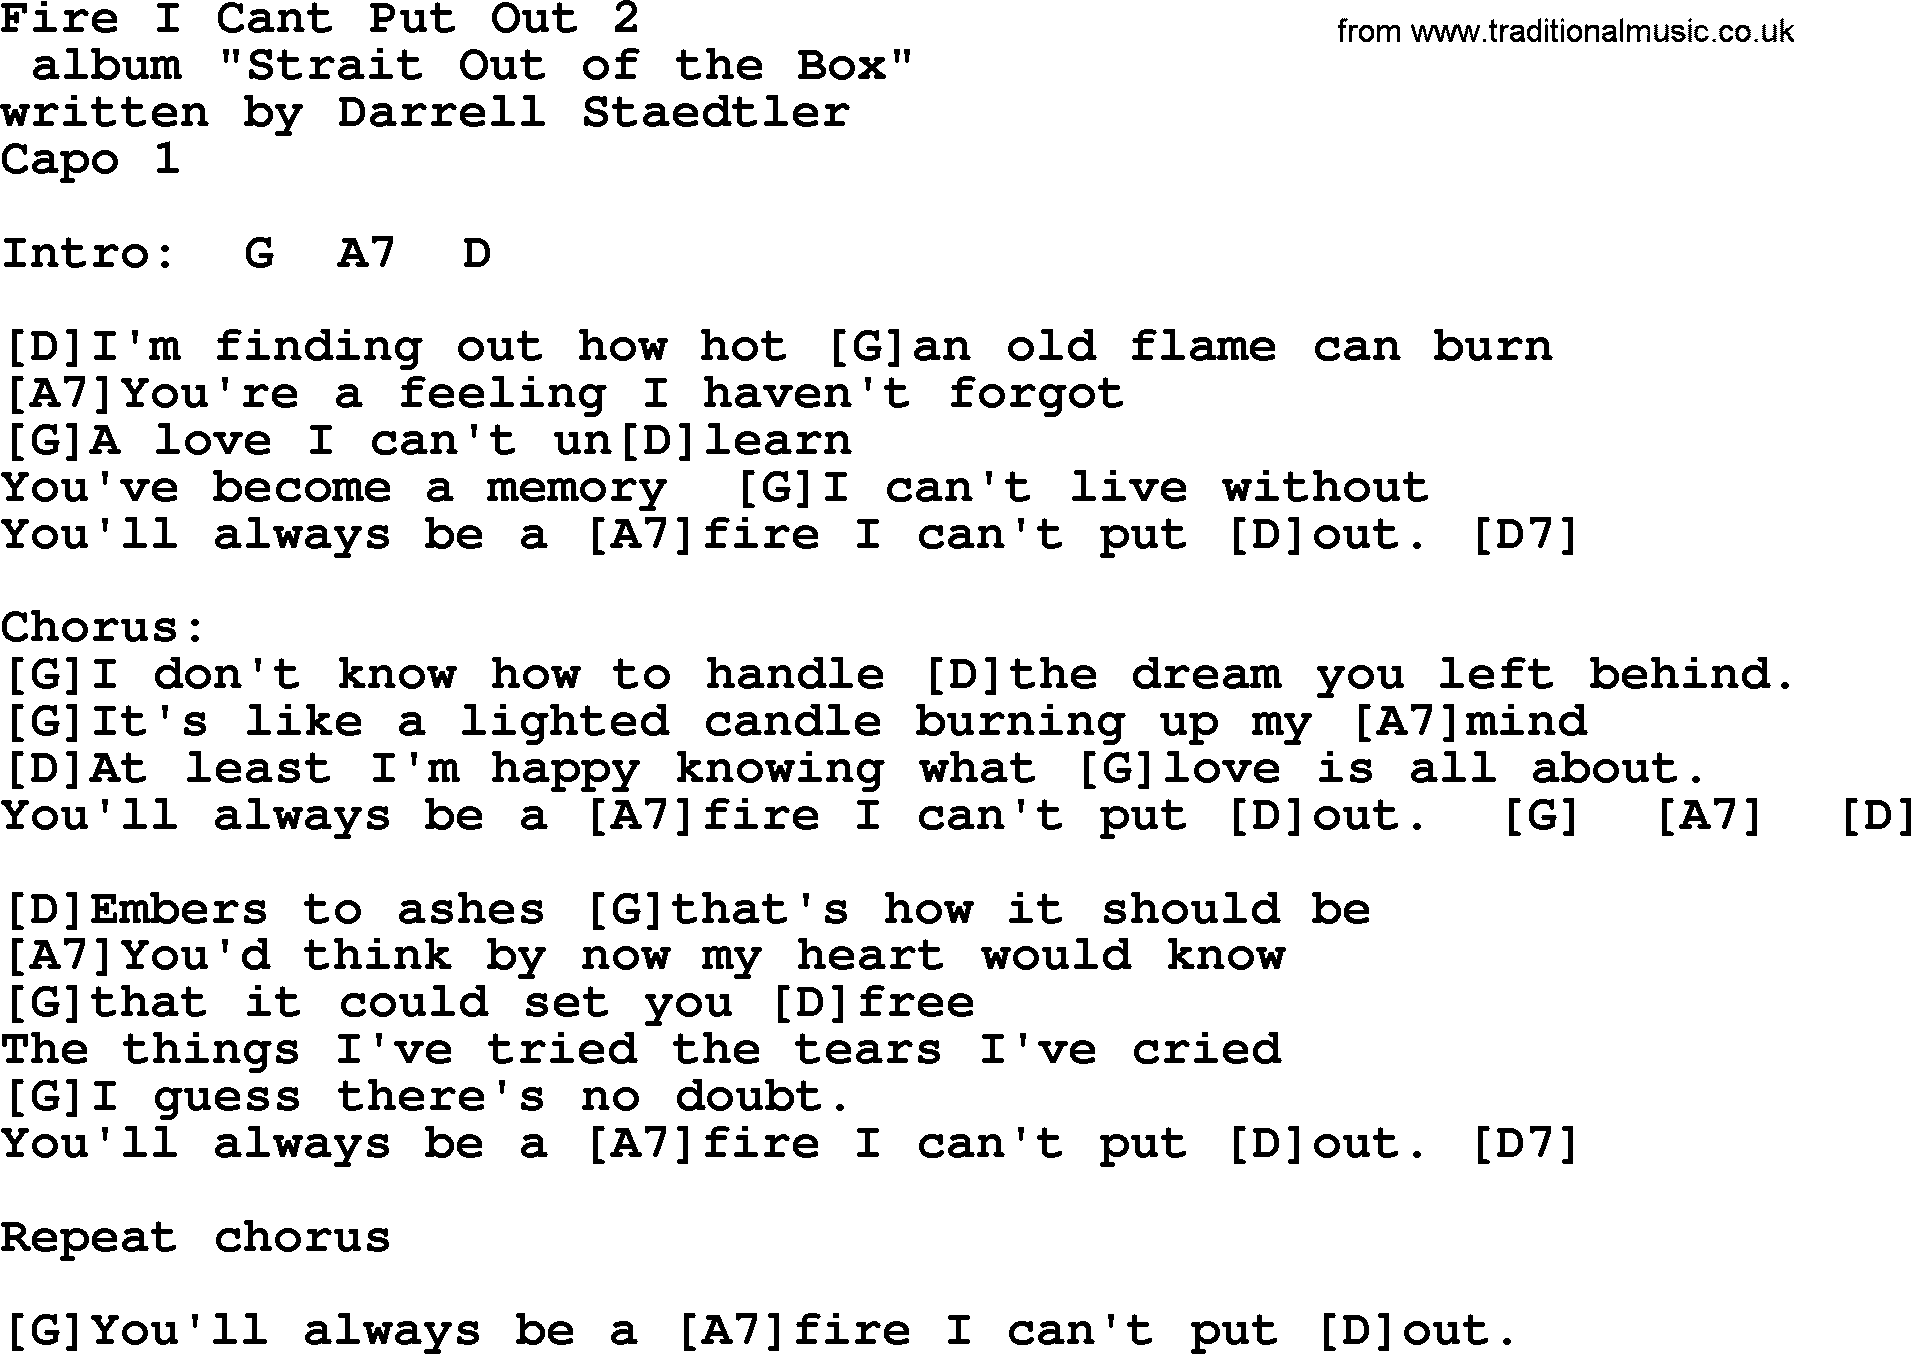 George Strait song: Fire I Cant Put Out 2, lyrics and chords